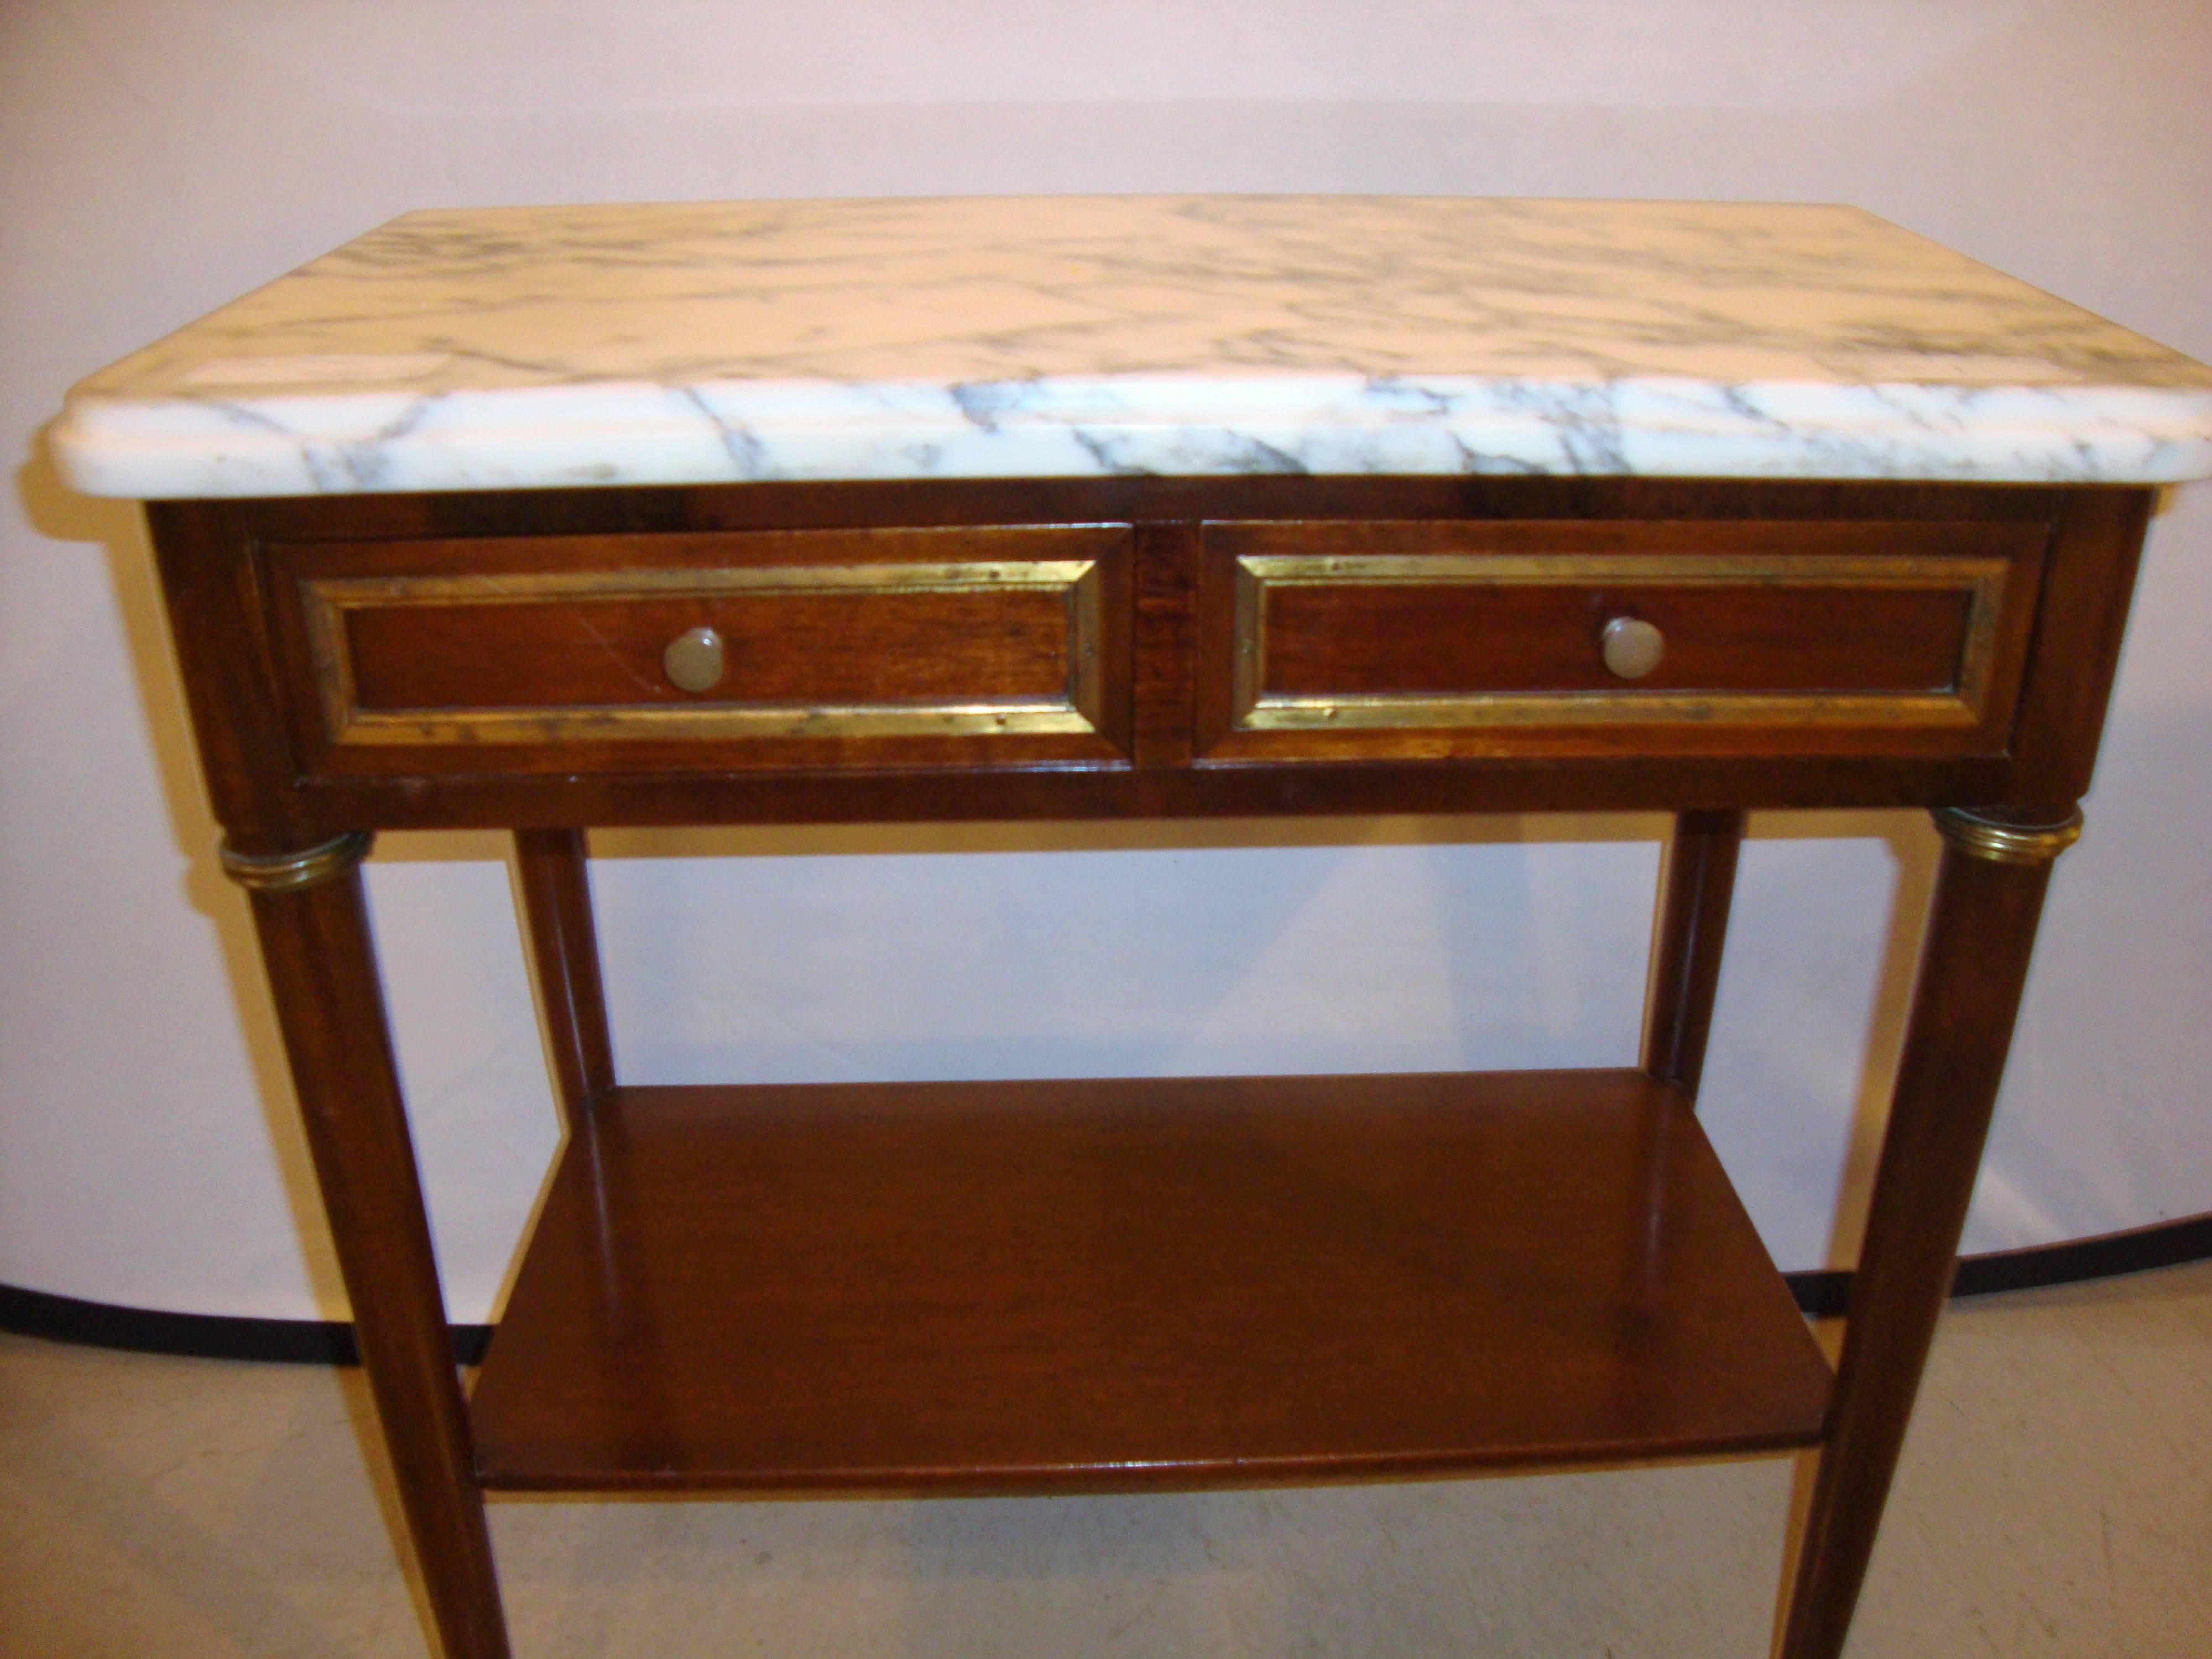 Diminutive marble-top mahogany stand, end table in the manner of Jansen. Louis XVI style case having bronze mounts double drawers supporting a marble top.